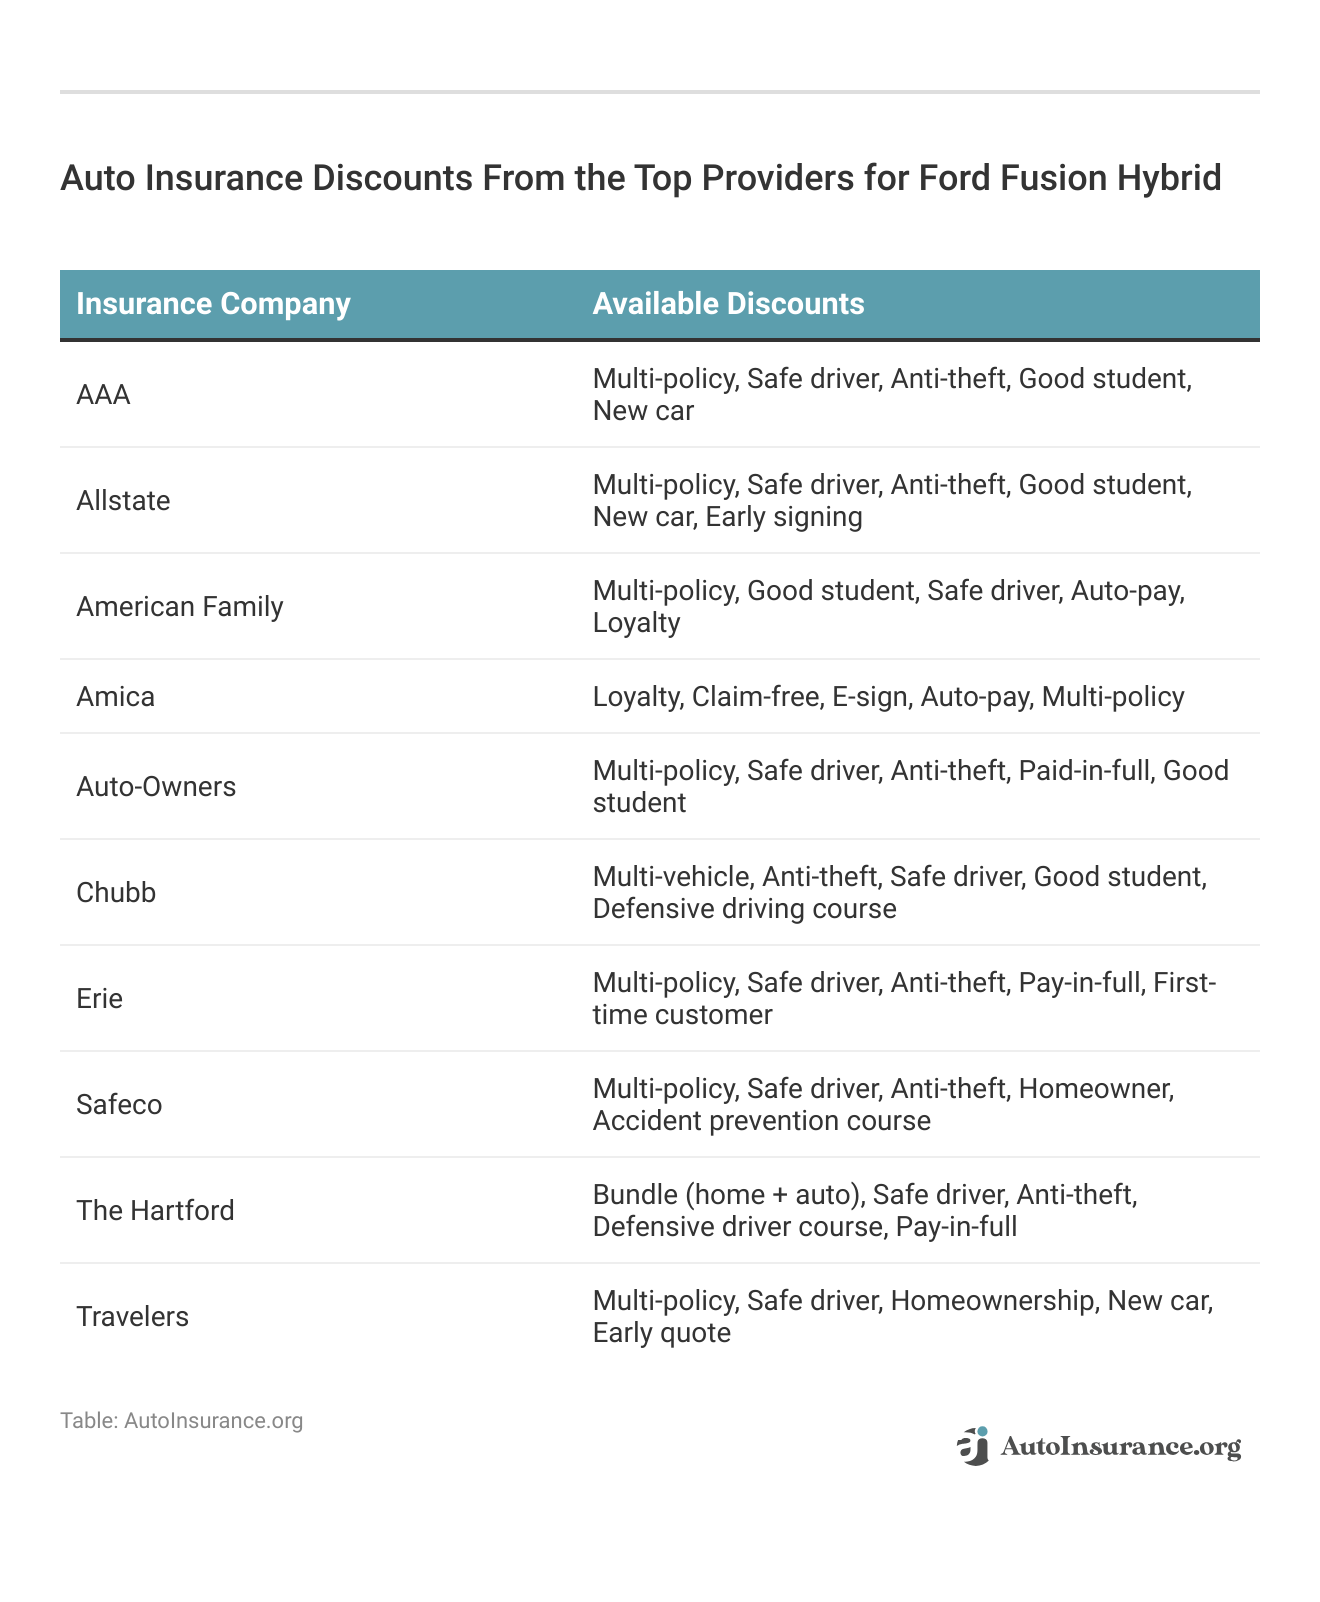 <h3>Auto Insurance Discounts From the Top Providers for Ford Fusion Hybrid</h3>